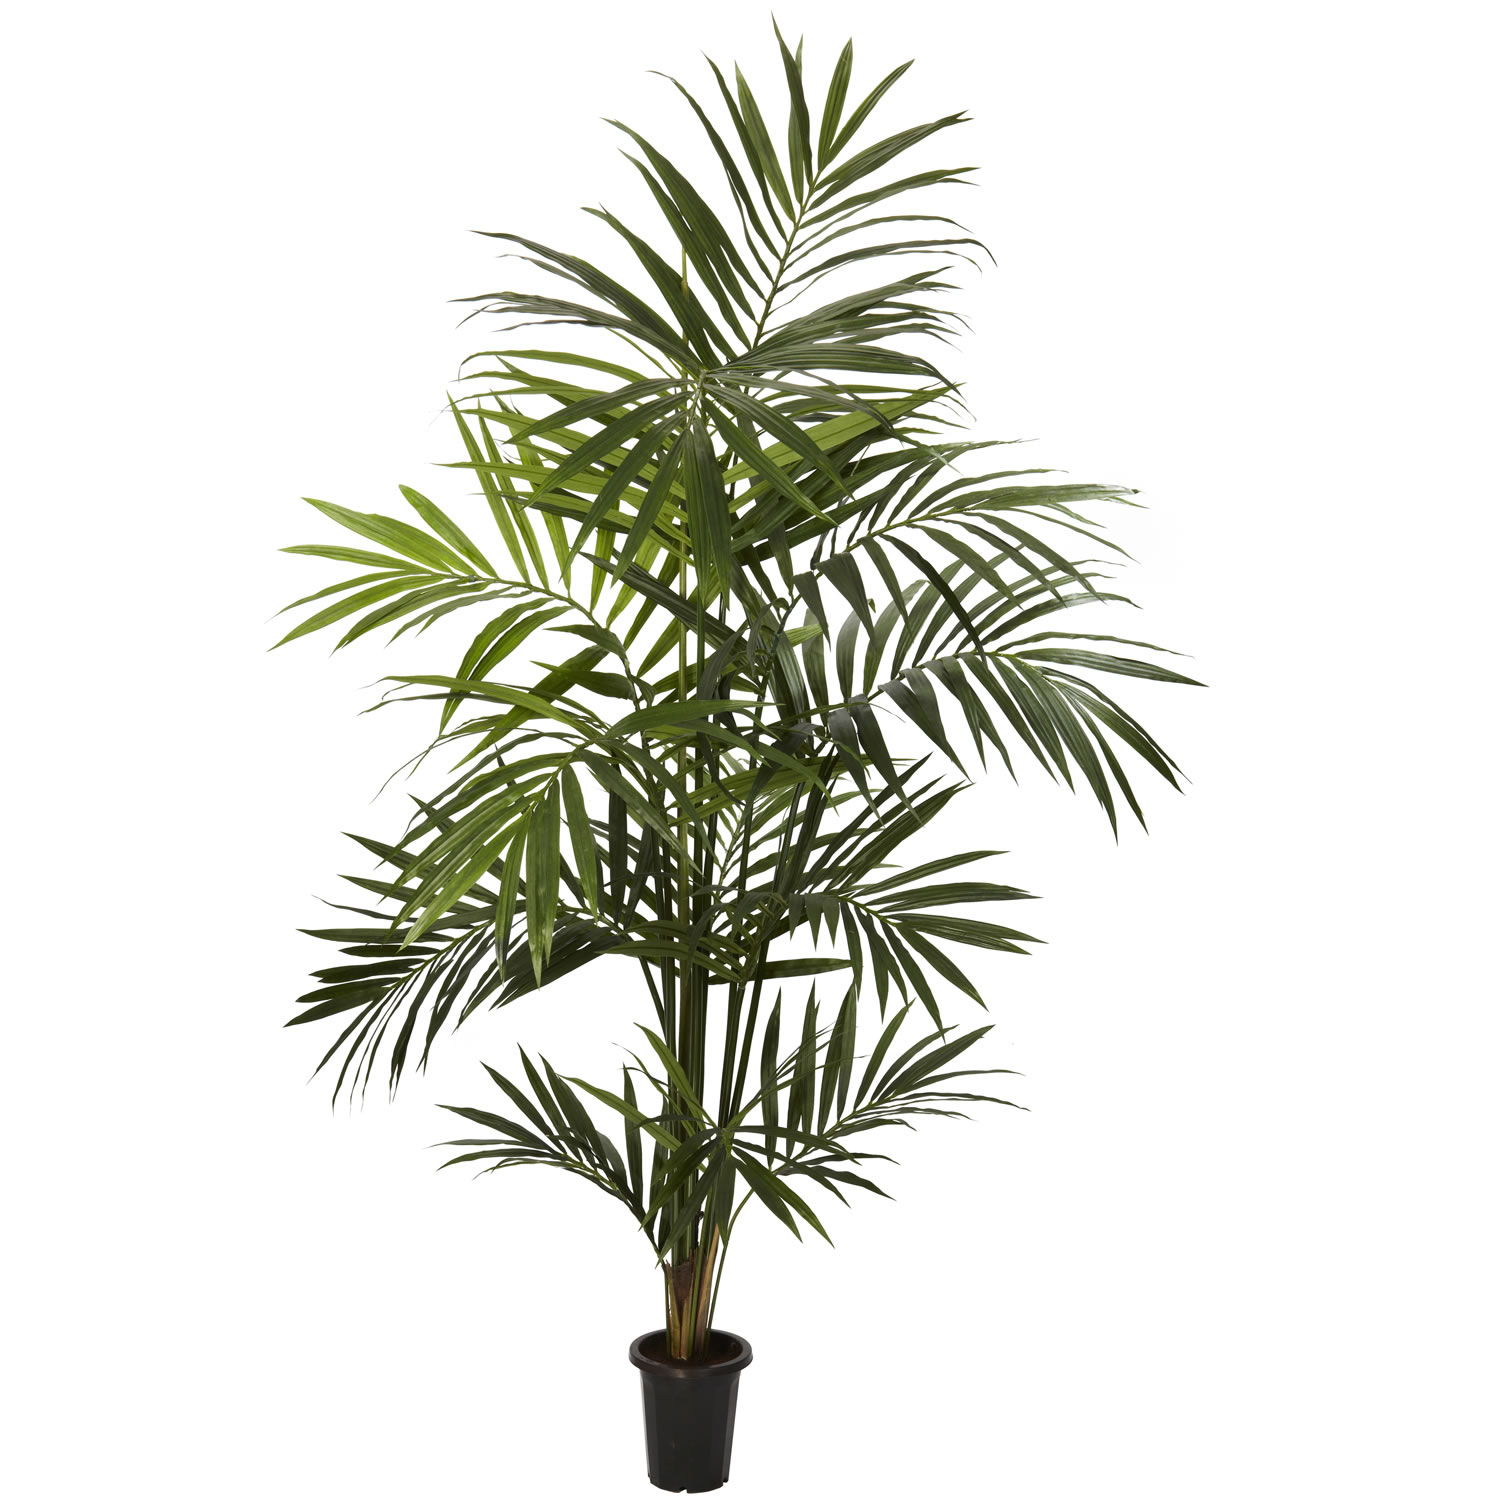 7 Foot Kentia Palm Tree: Potted